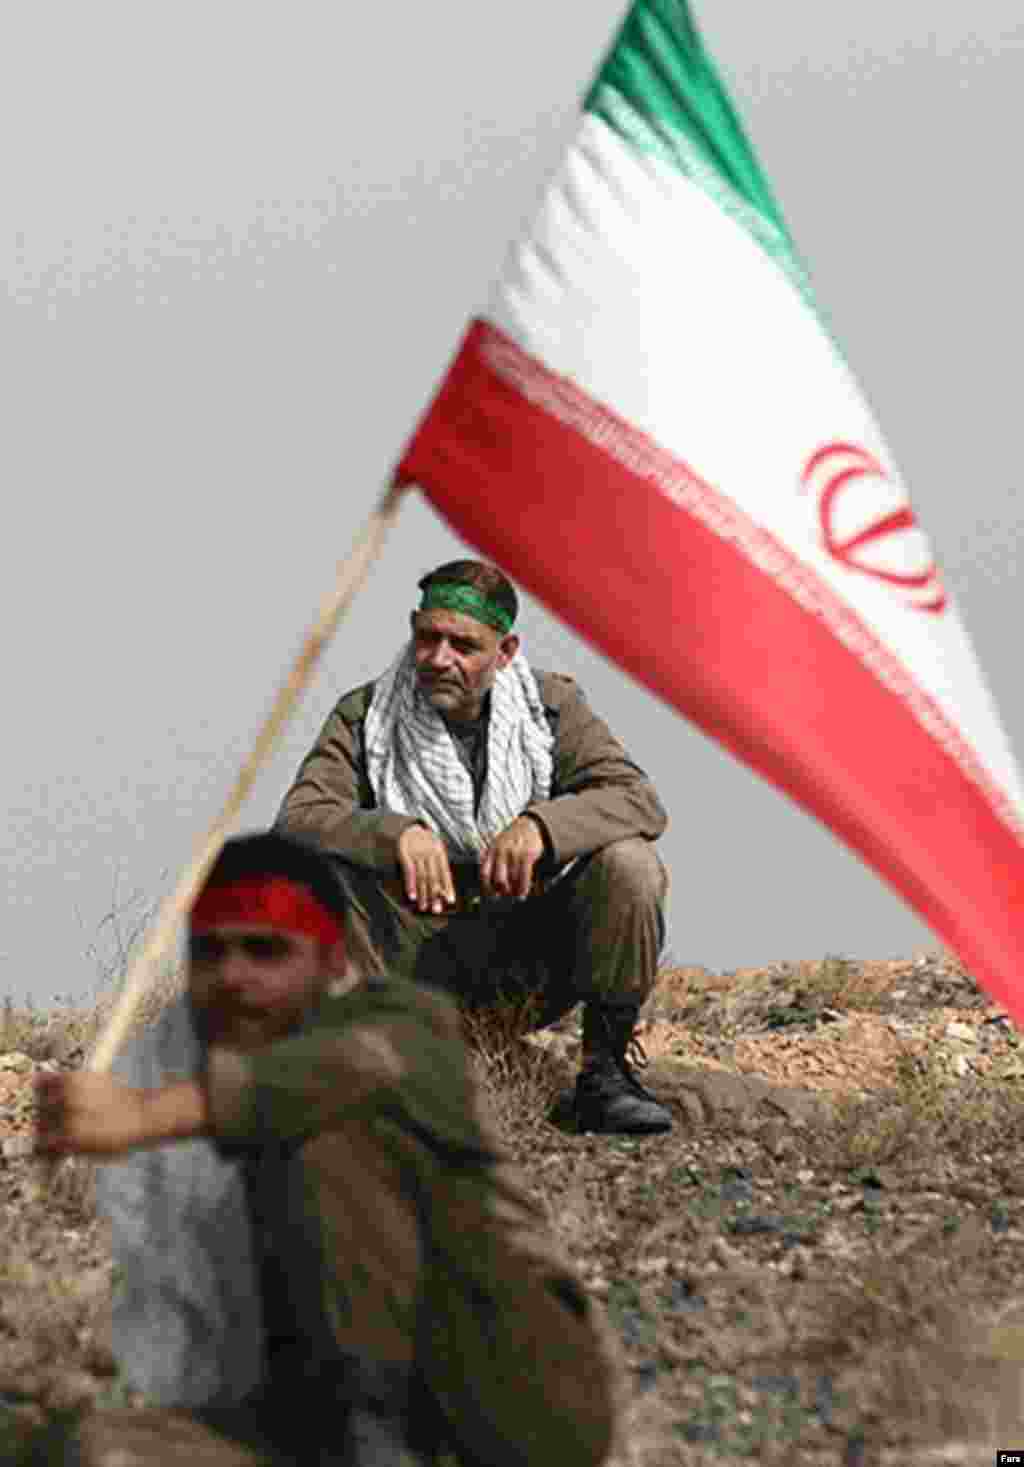 Iranian military observers watching manuevers in November (Fars) - In January, former UN chief weapons inspector Hans Blix told RFE/RL that the West should offer Iran security guarantees as a way of extracting concessions from Tehran concerning its nuclear program.